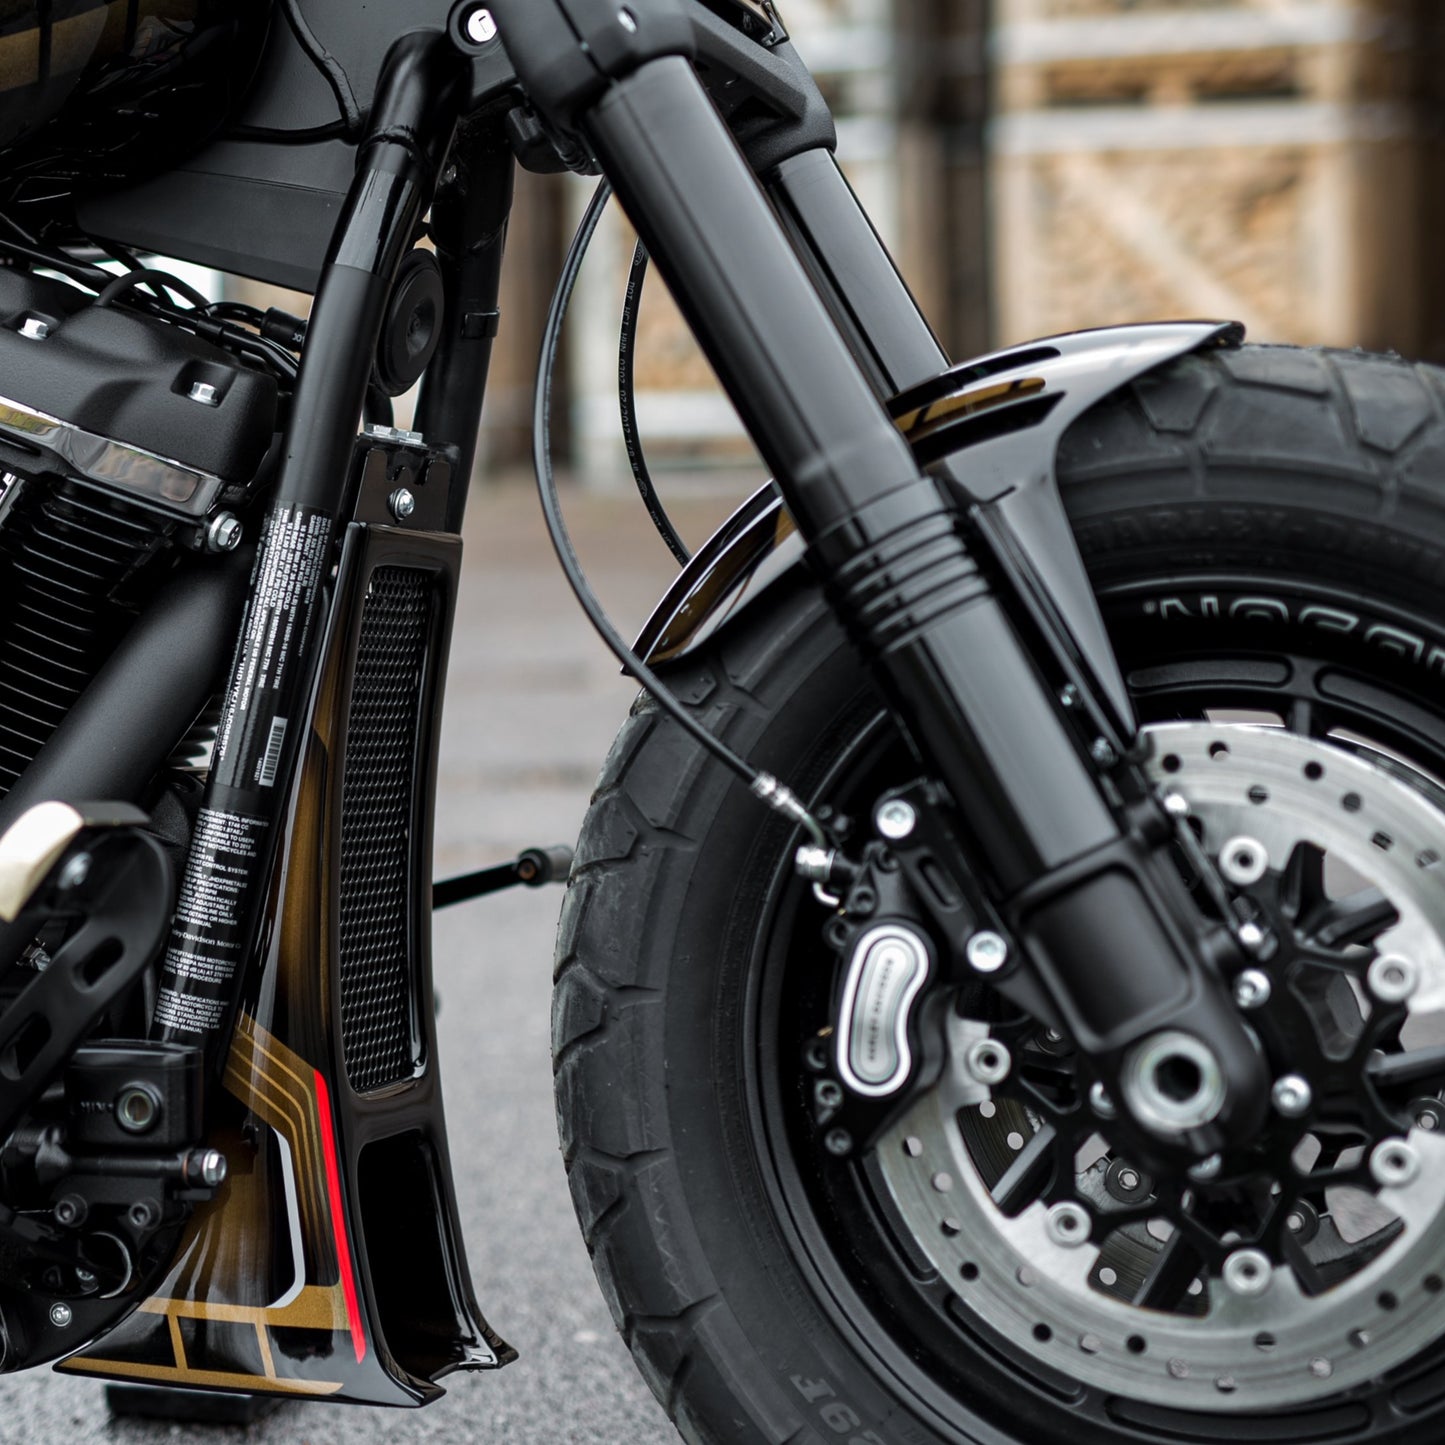 Zoomed Harley Davidson  motorcycle with Killer Custom rear fender in an industrial environment